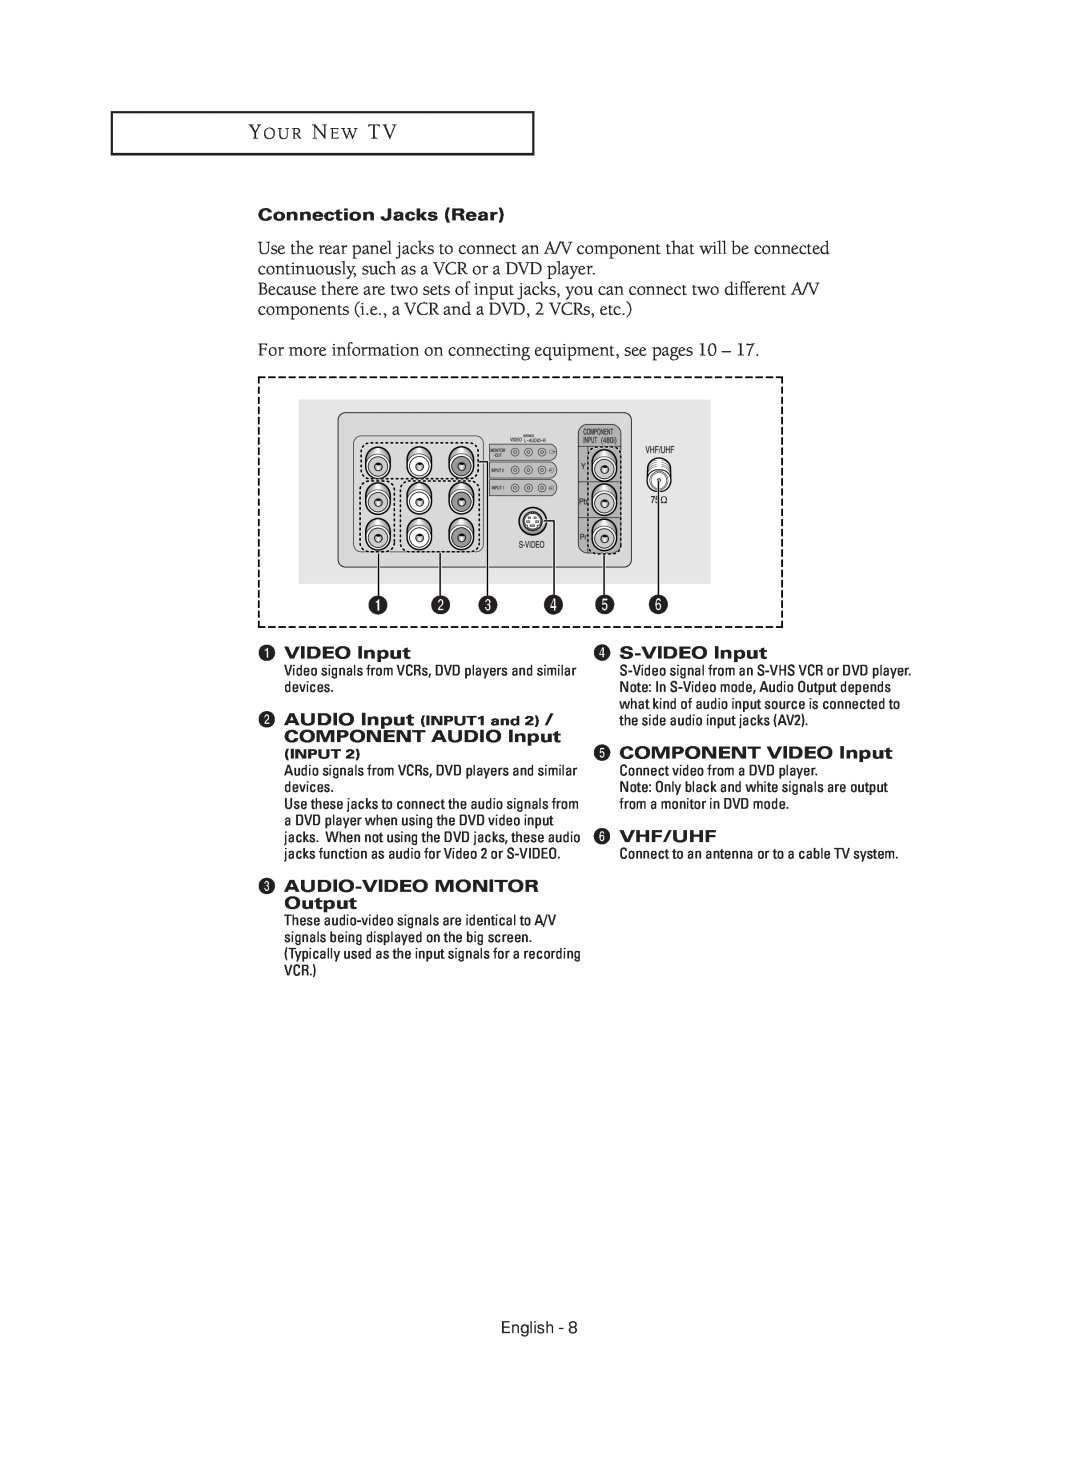 Samsung TX-R2735G manual For more information on connecting equipment, see pages 10 